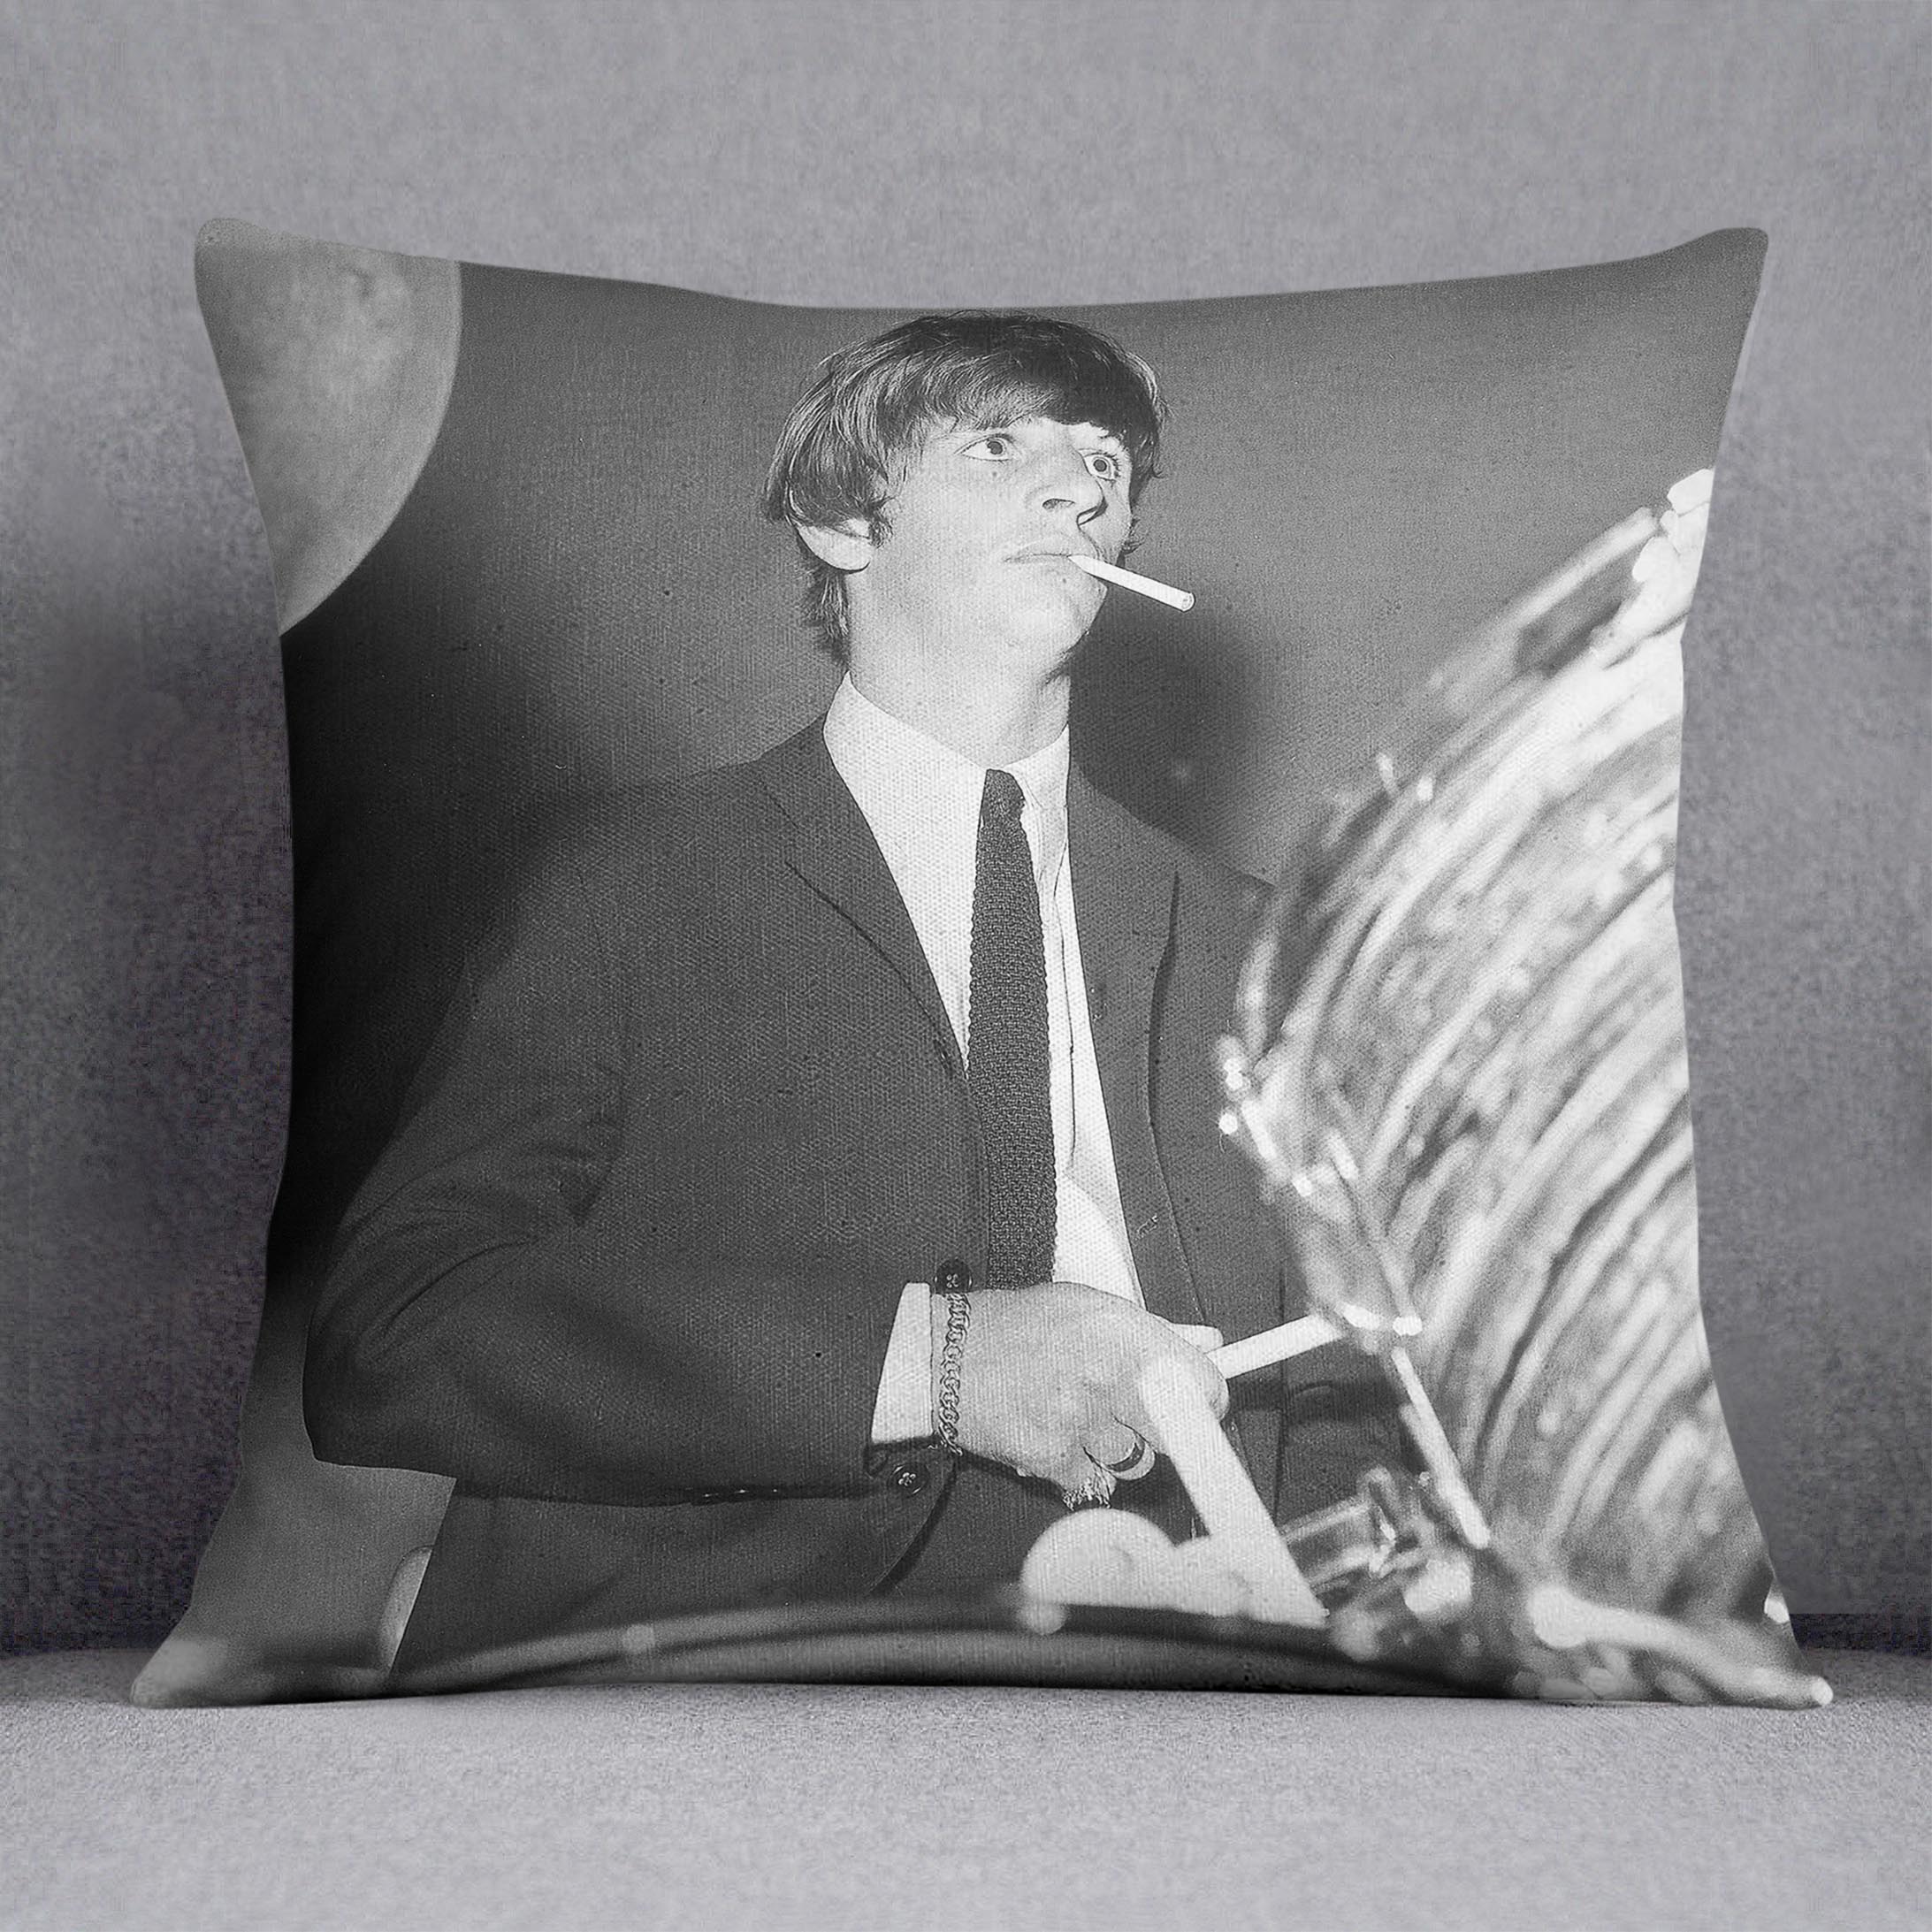 Ringo Starr playing the drums Cushion